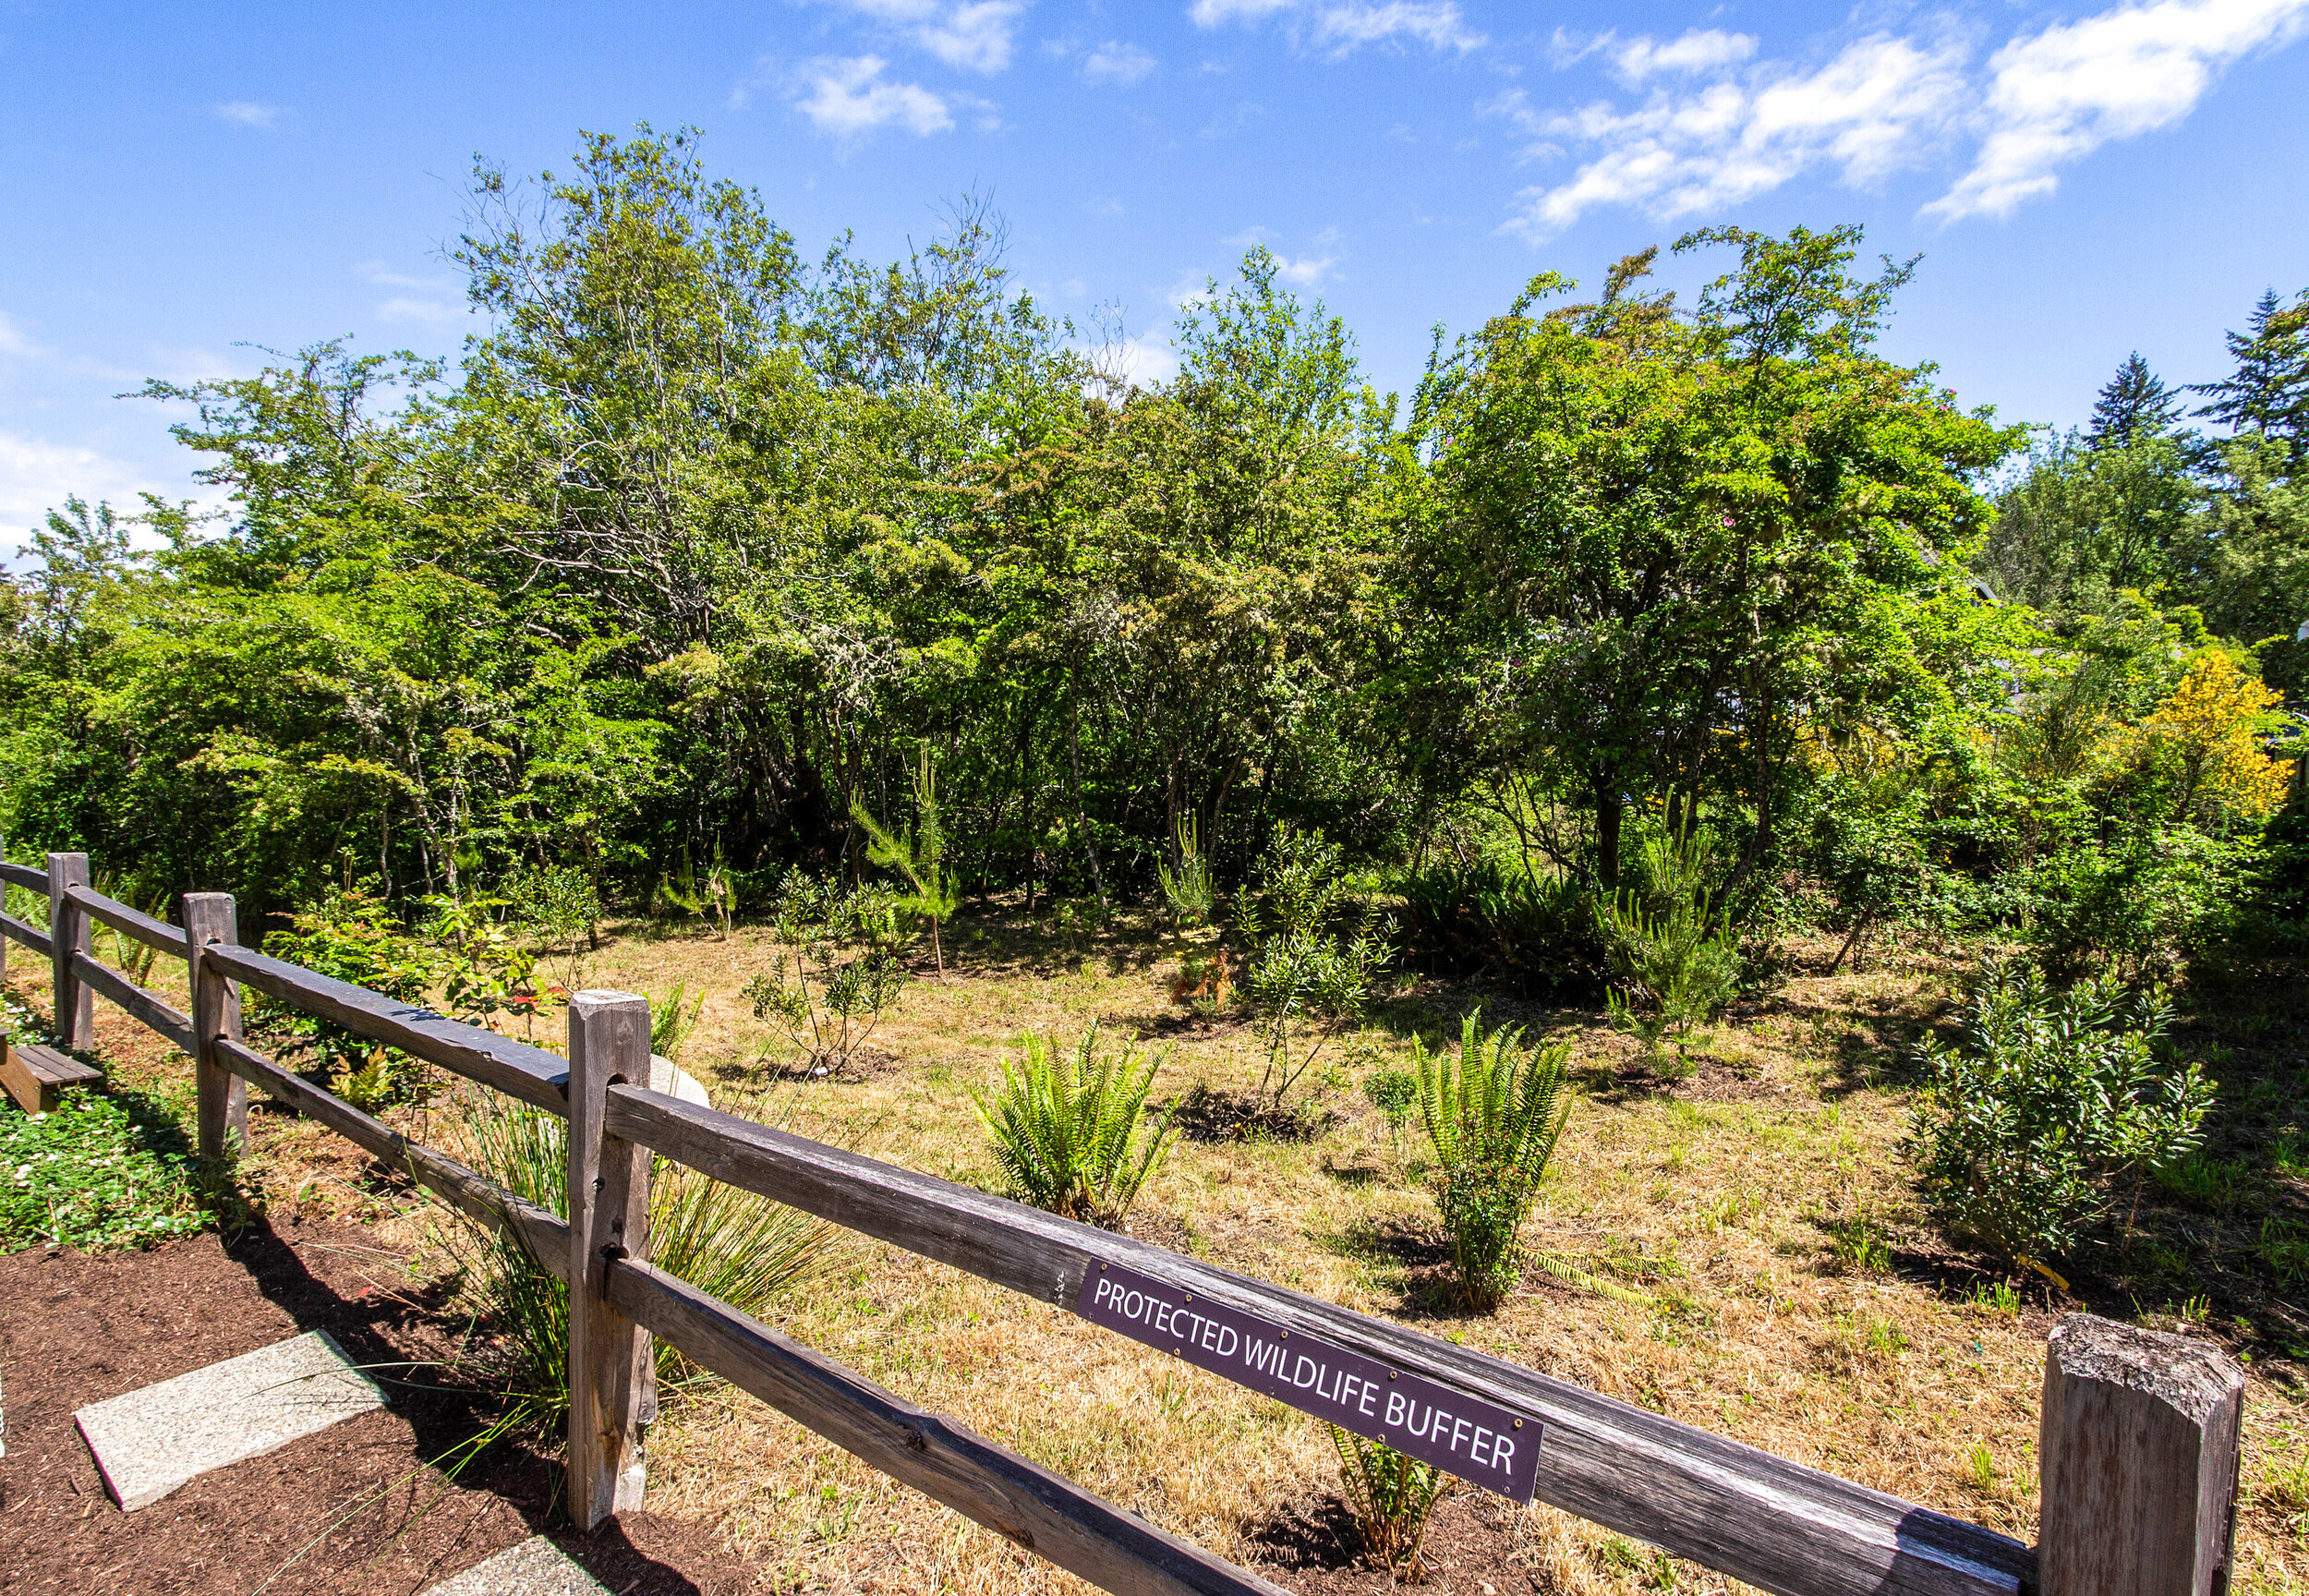 Revel in the abundant nature surrounding the home, as protected wildlife land flocks the side and rear of the property. 